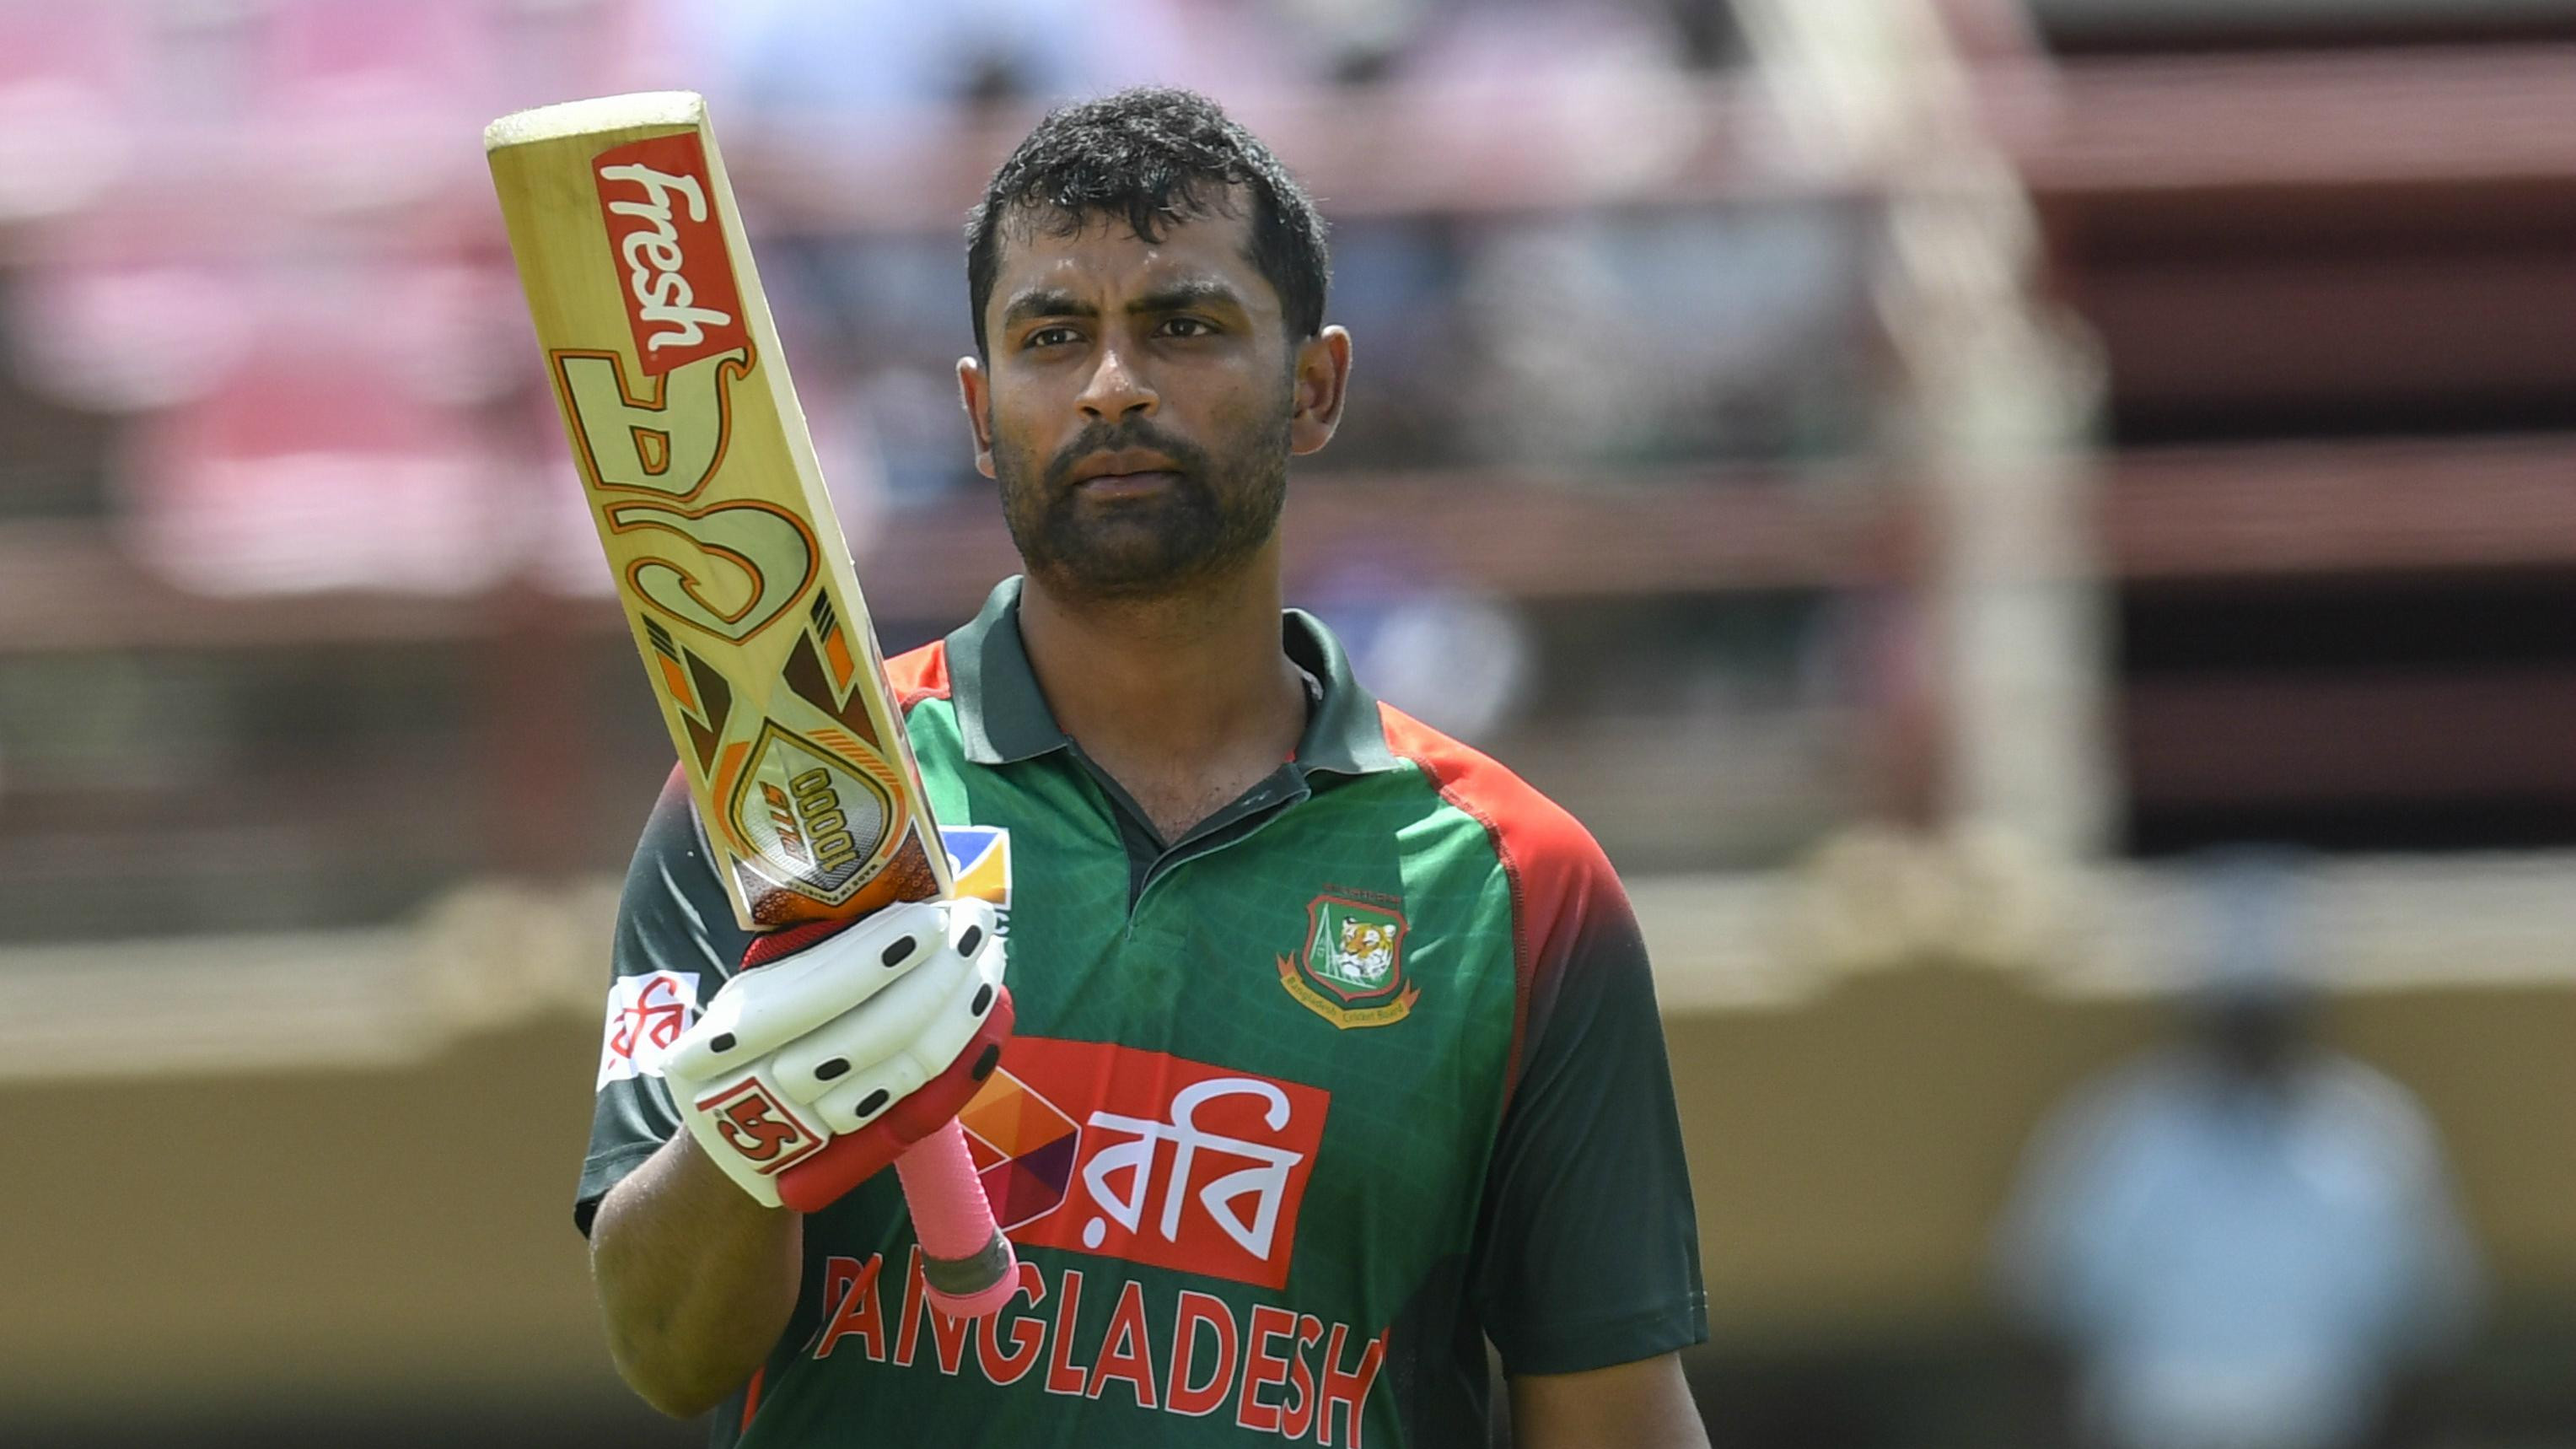 NZ v BAN 2021: Tamim Iqbal opts out of T20I series between New Zealand and Bangladesh